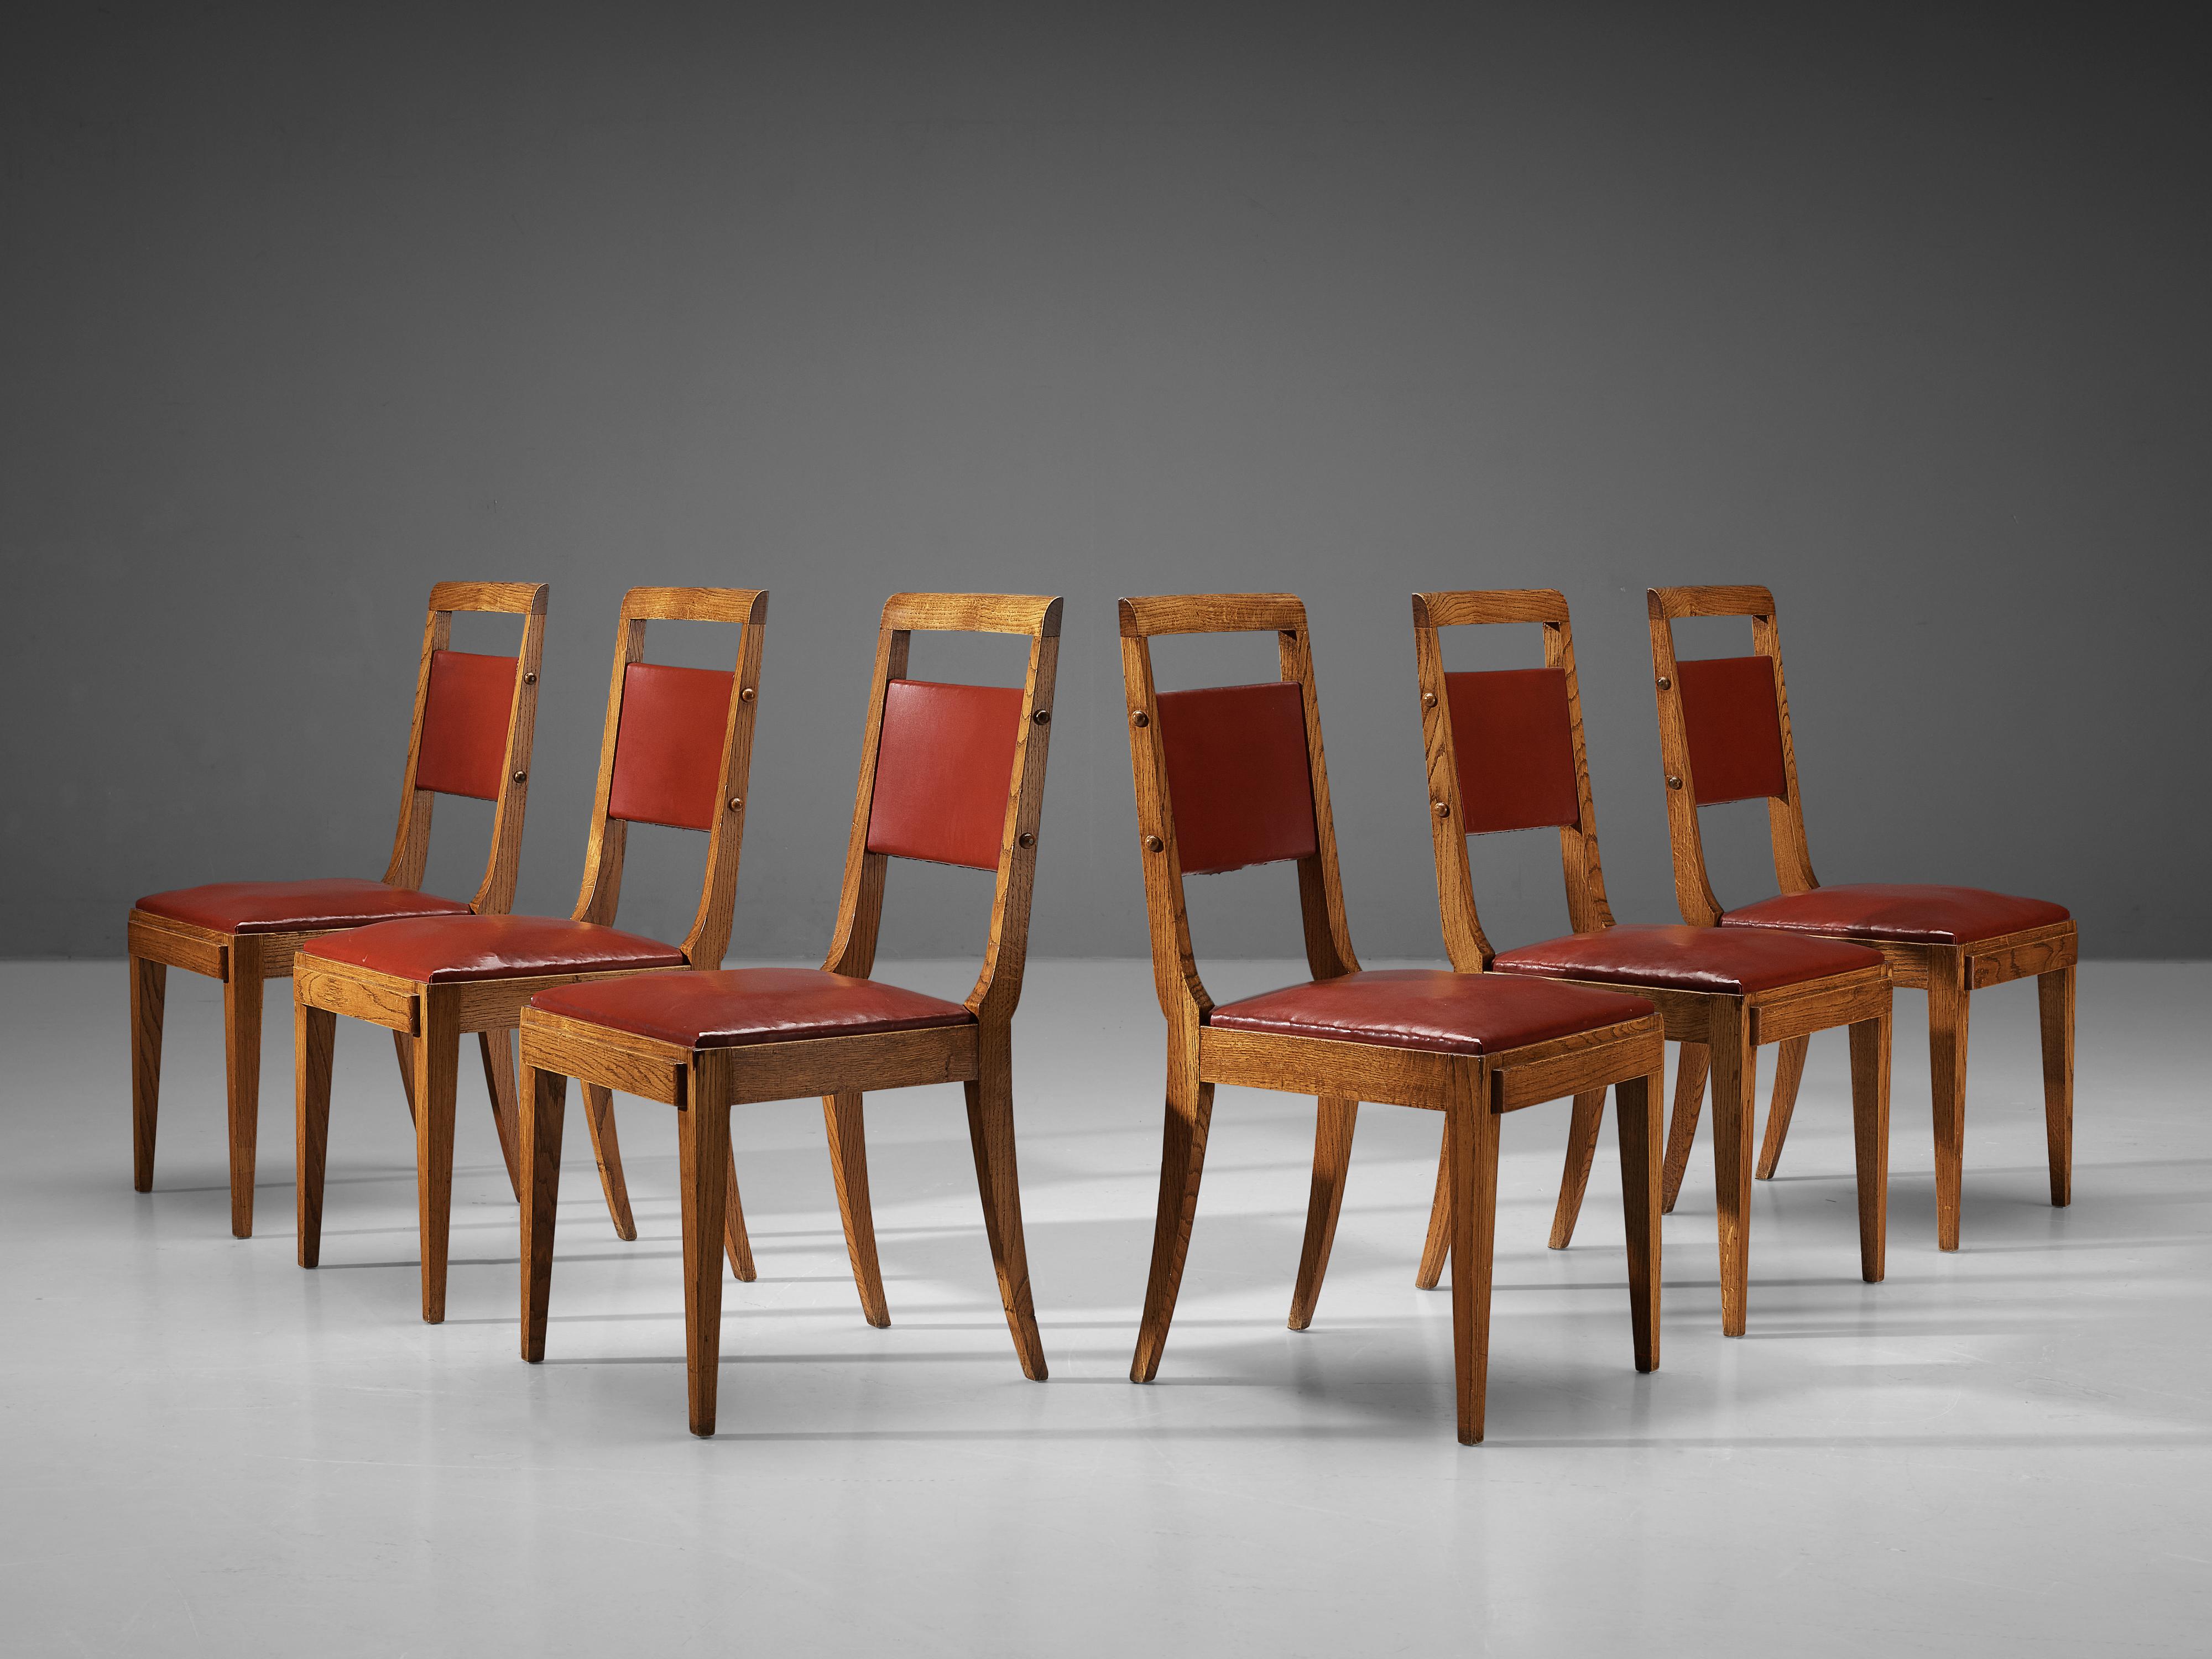 Dining chairs, oak, leatherette, Europe, 1960s

Set of six dining elegant chairs in oak. These chairs strongly resemble similar items designed by Studio BBPR. Note for example the characteristic tapered and titled legs with sharp edges. The sculpted